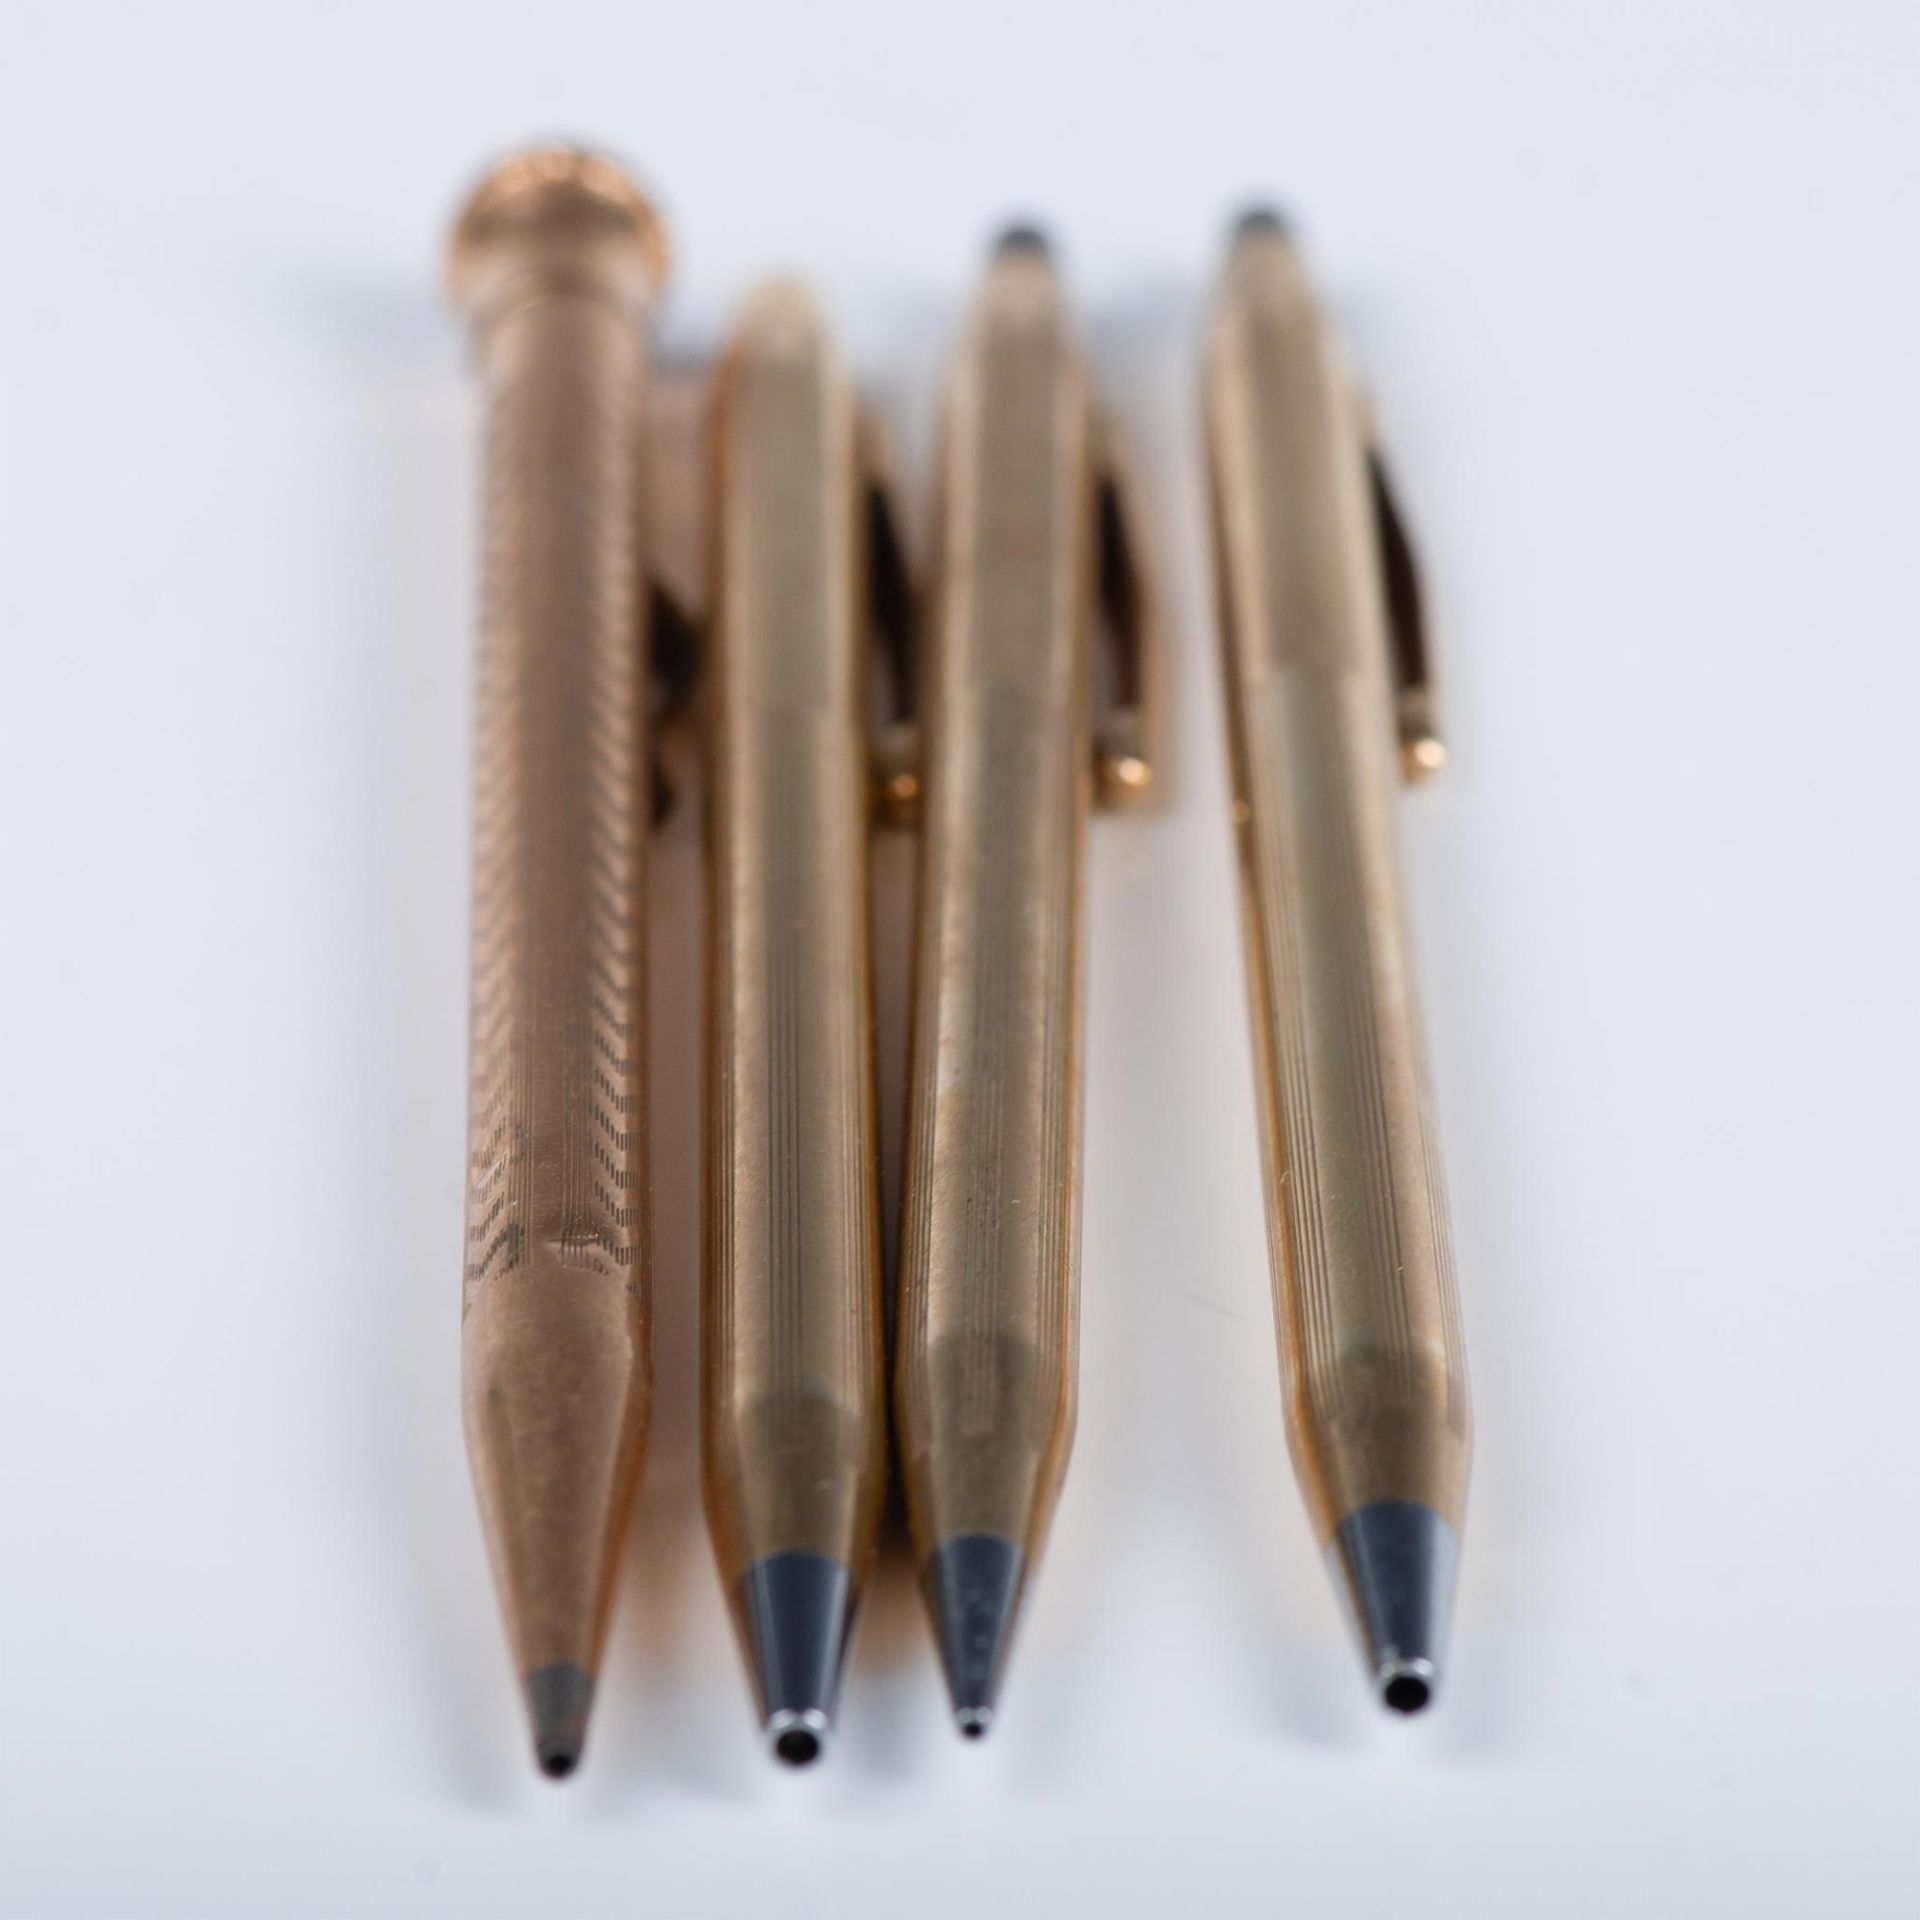 14pc Vintage Pens and Pencils, Most Gold Filled - Image 5 of 7